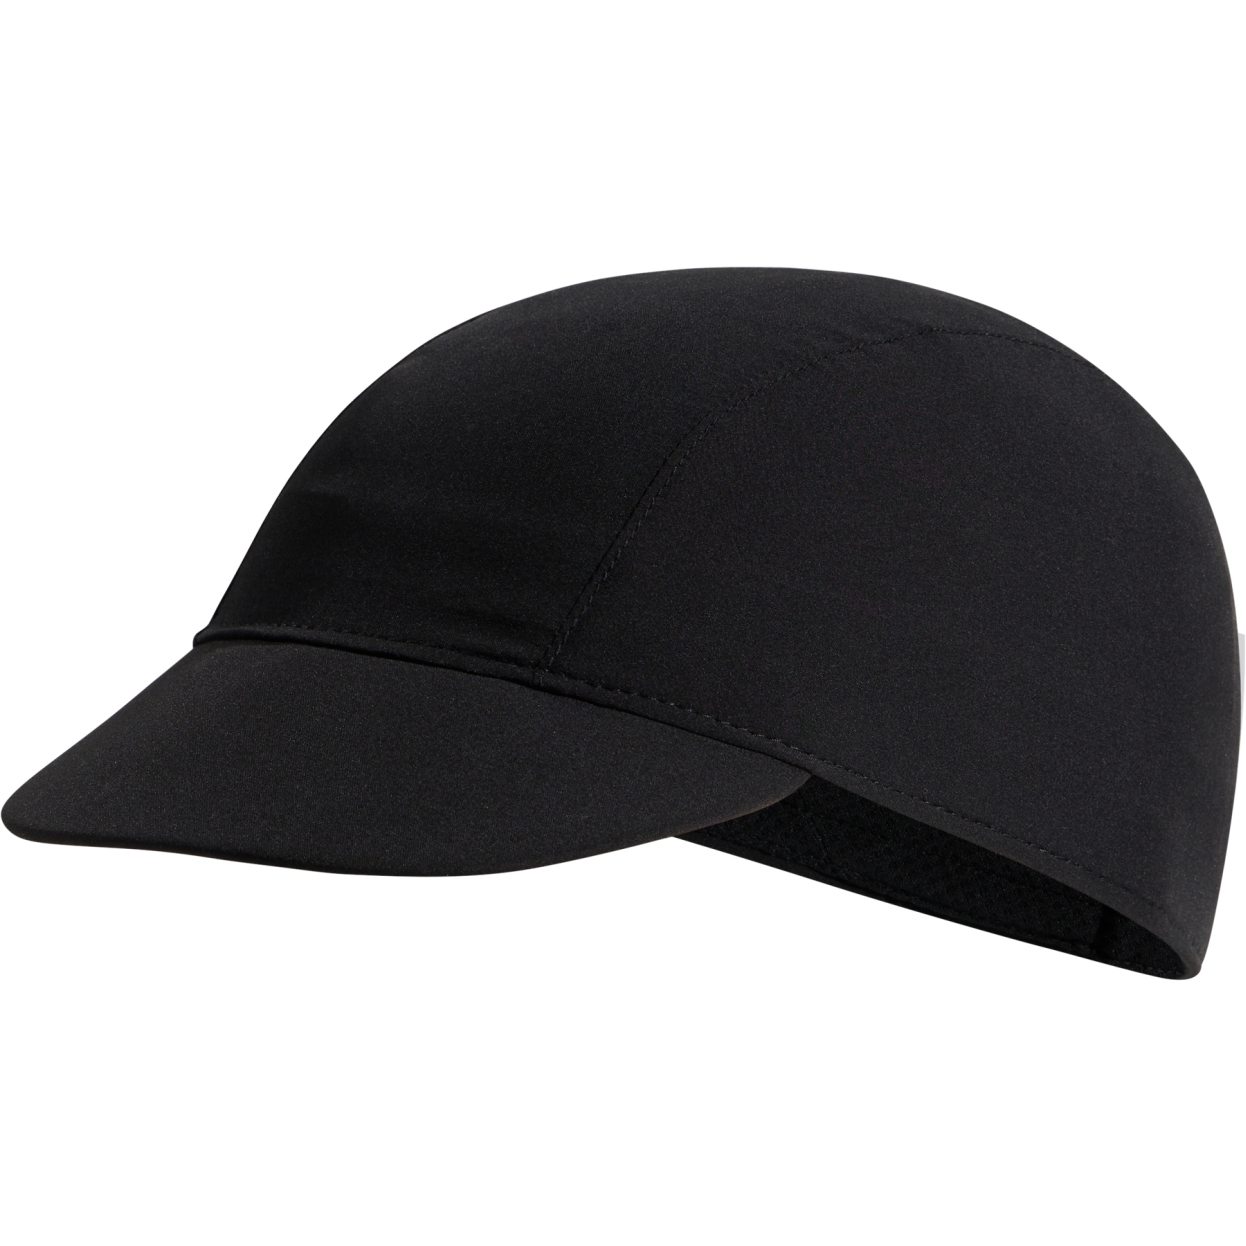 Picture of Odlo Performance Cycling Cap - black